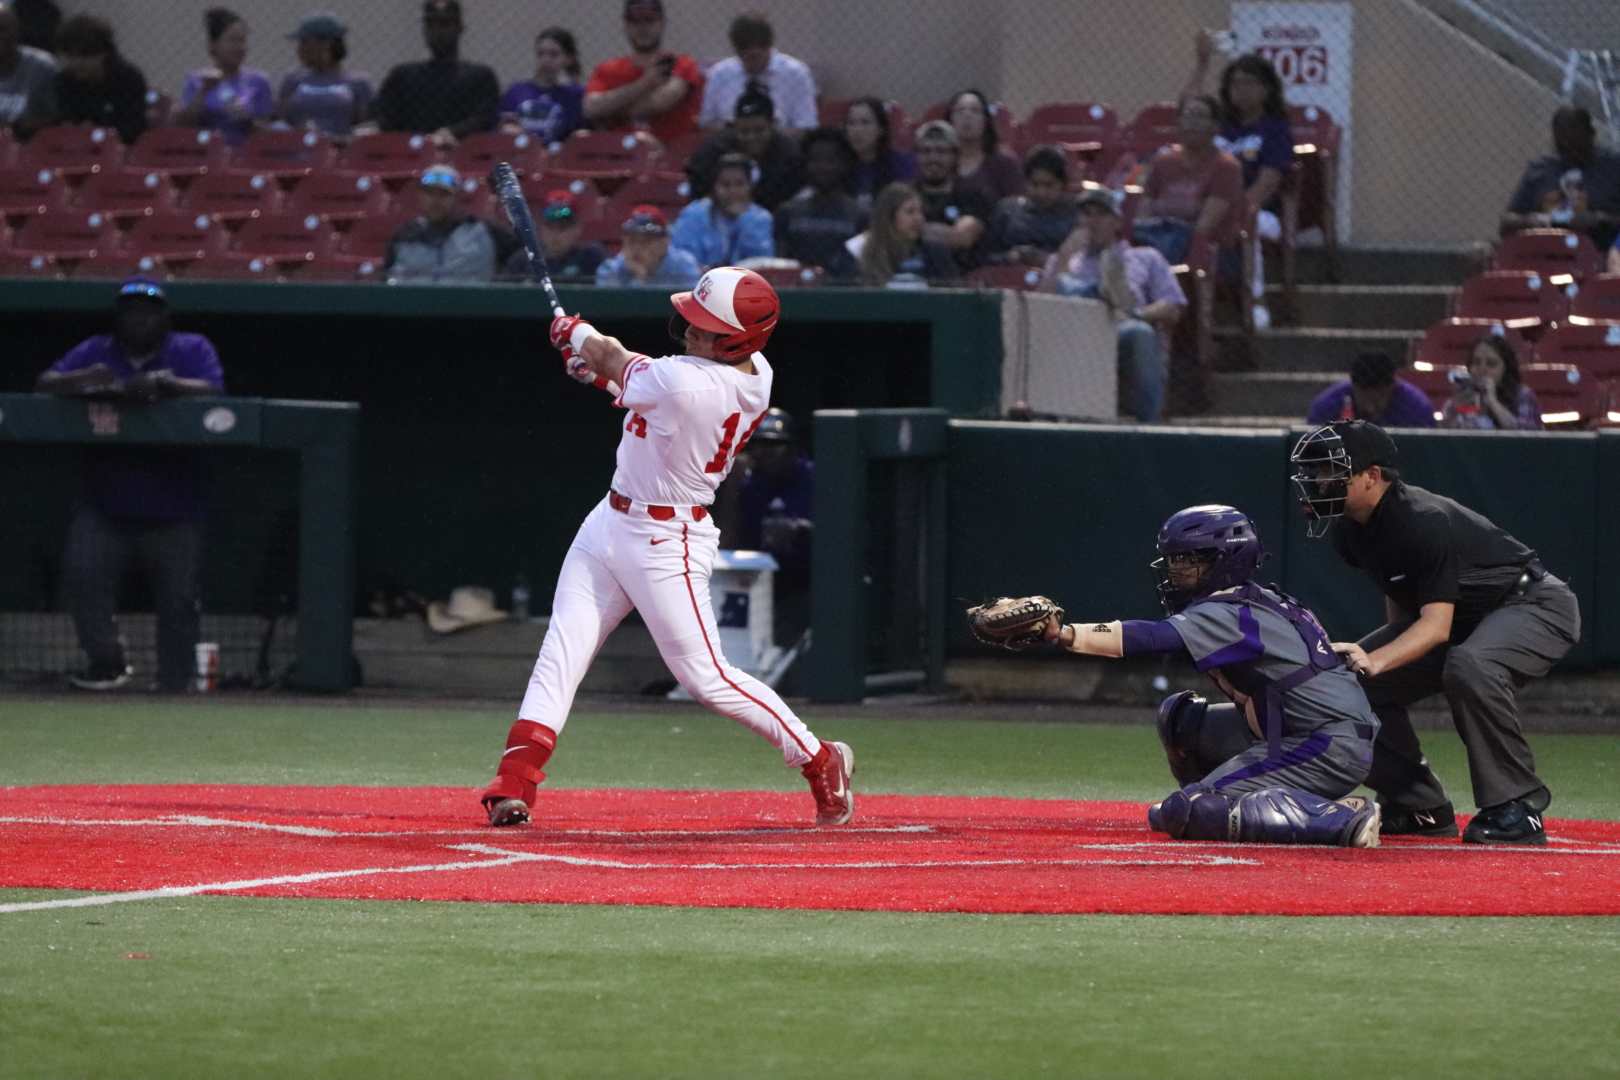 UH baseball's Alex Lopez hit two doubles in the Cougars' Tuesday night victory over Prairie View A&M. | James Mueller/The Cougar